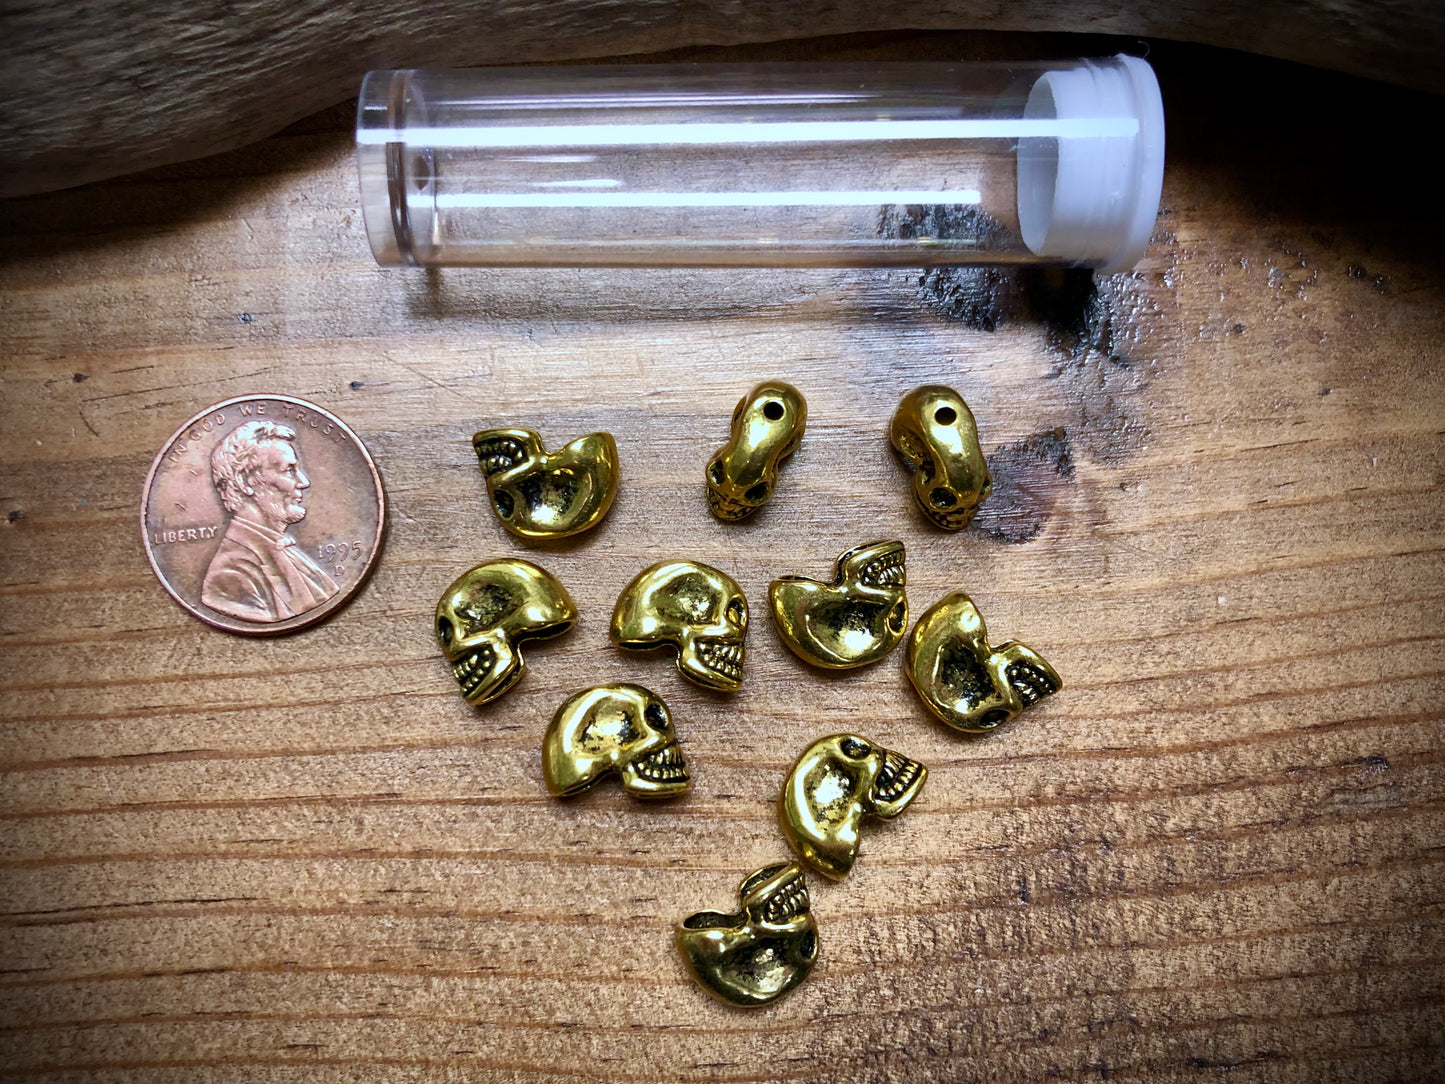 Gold Tone Pewter Spacers Set - 4mm x 10mm Vertical Squished Skulls